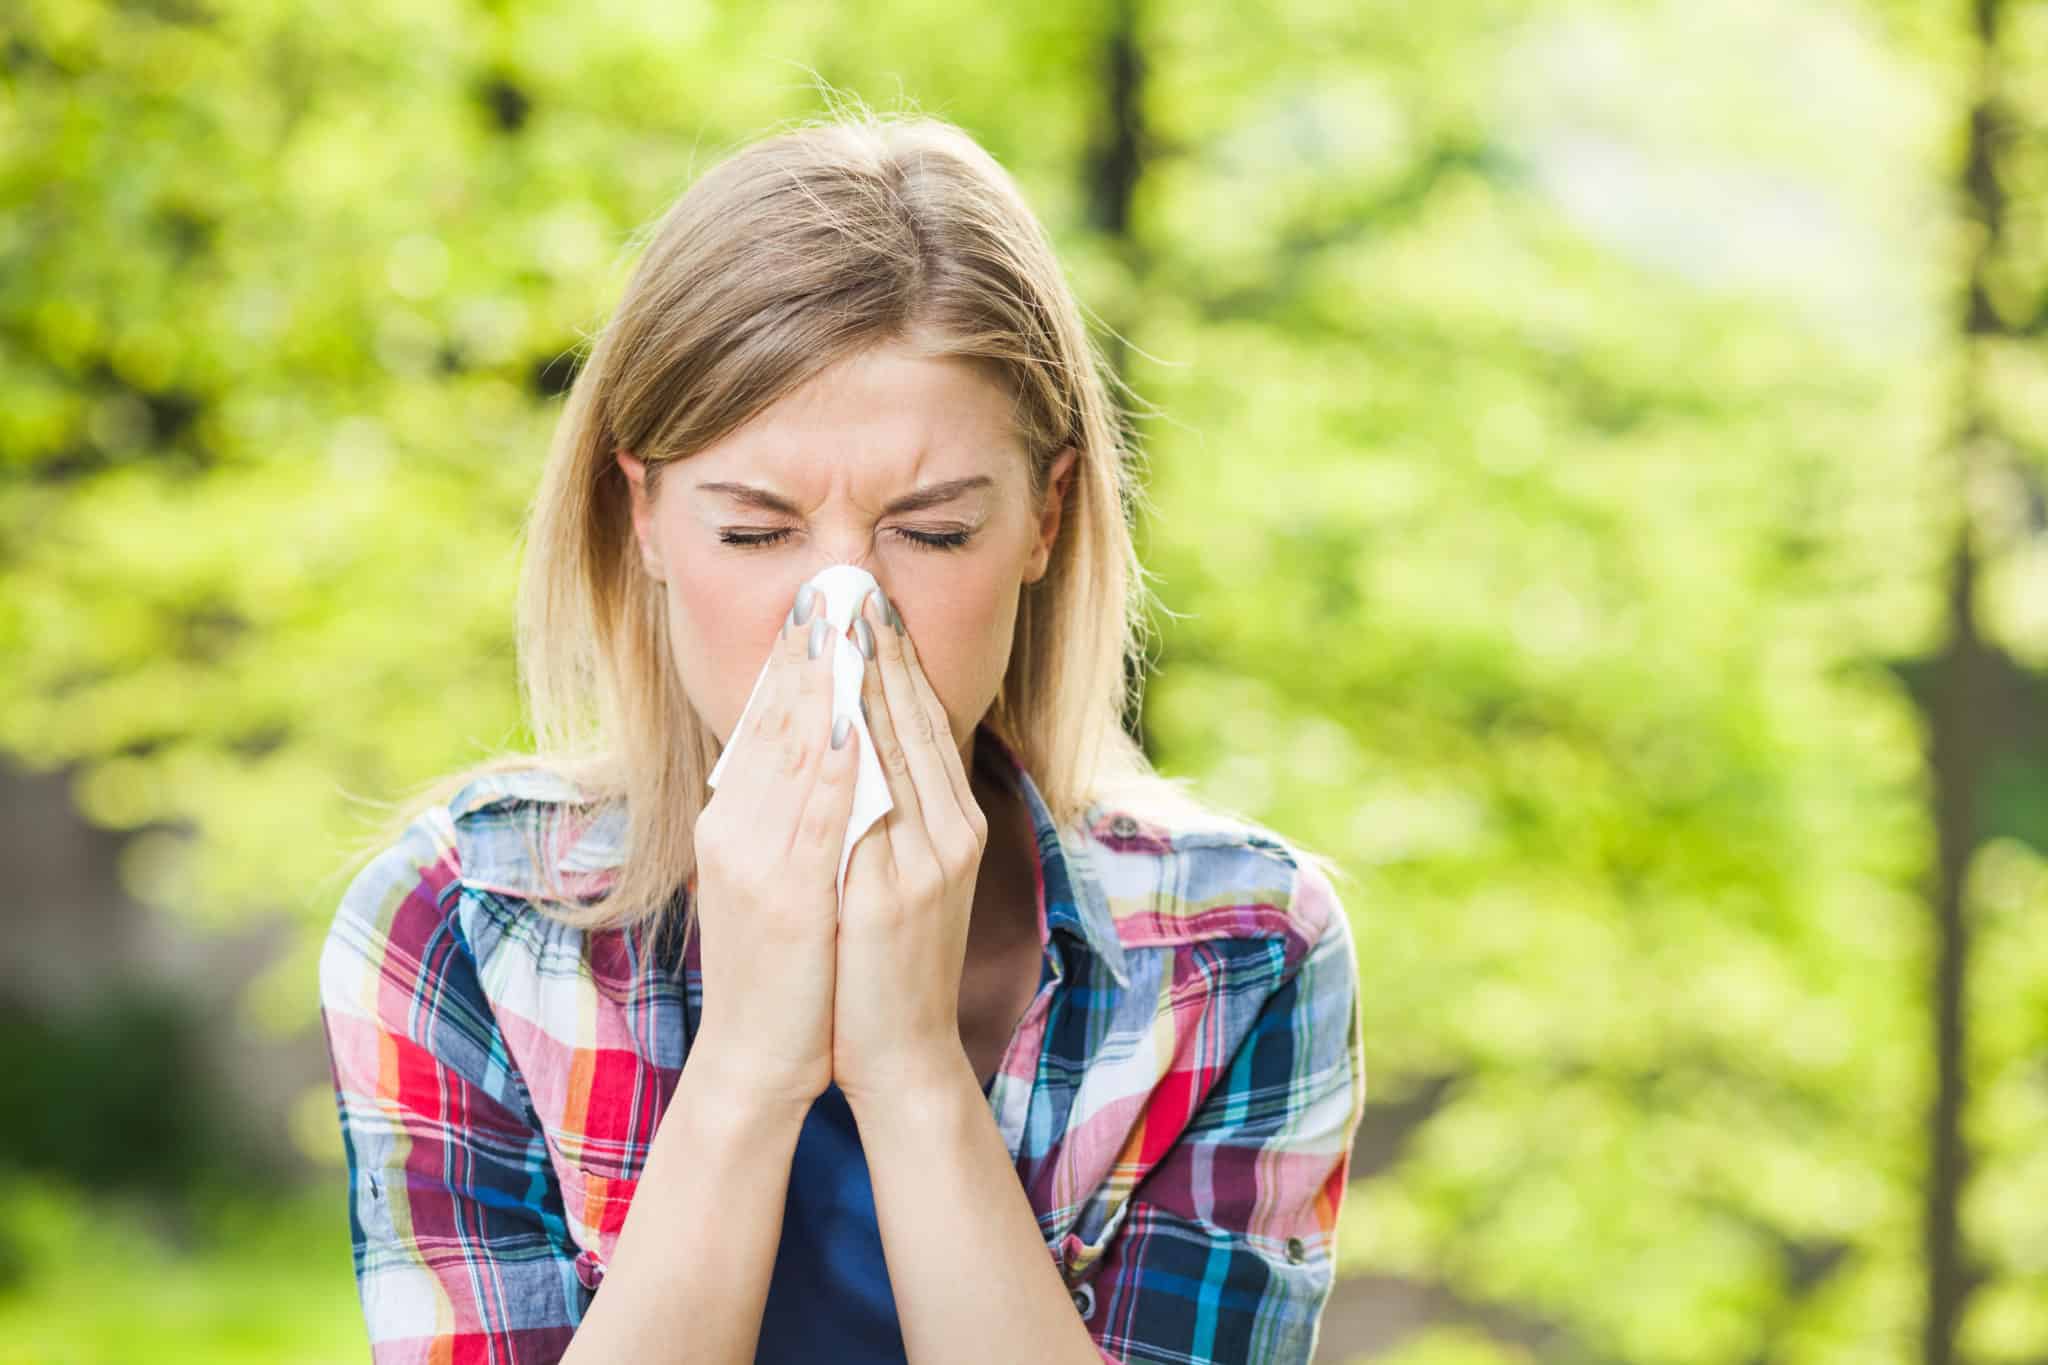 Treat your allergies naturally with these holistic remedies.